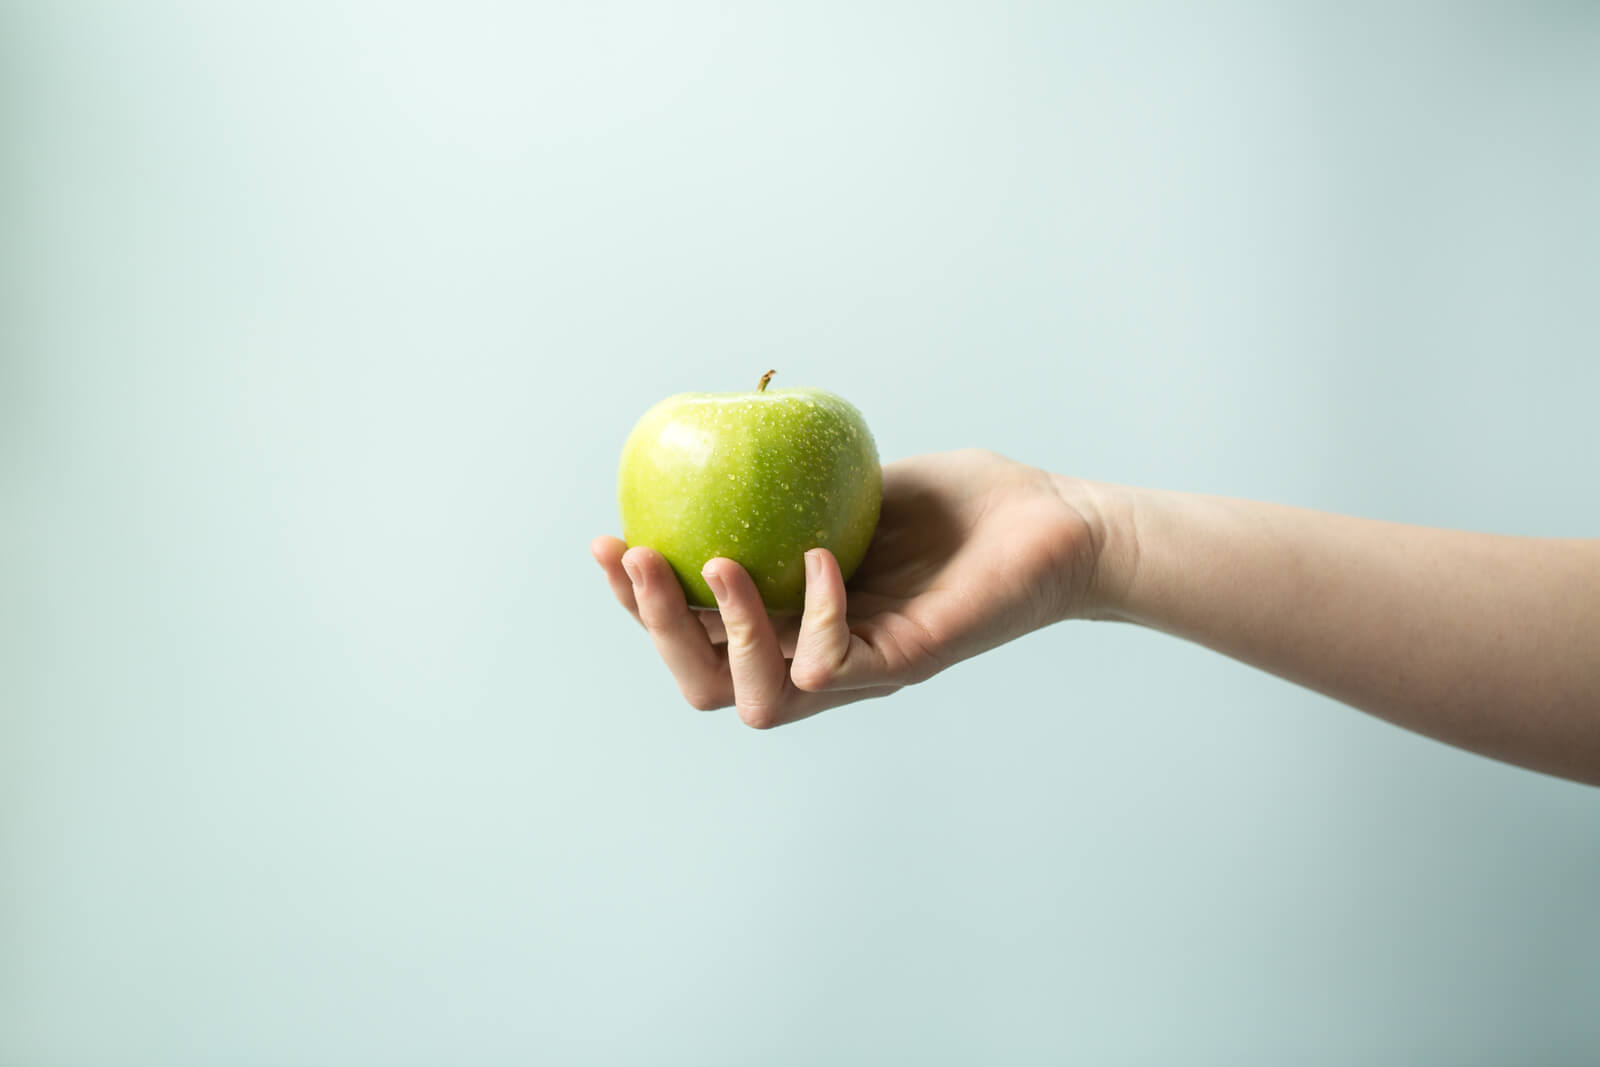 A woman's hand clutching a vibrant green apple.